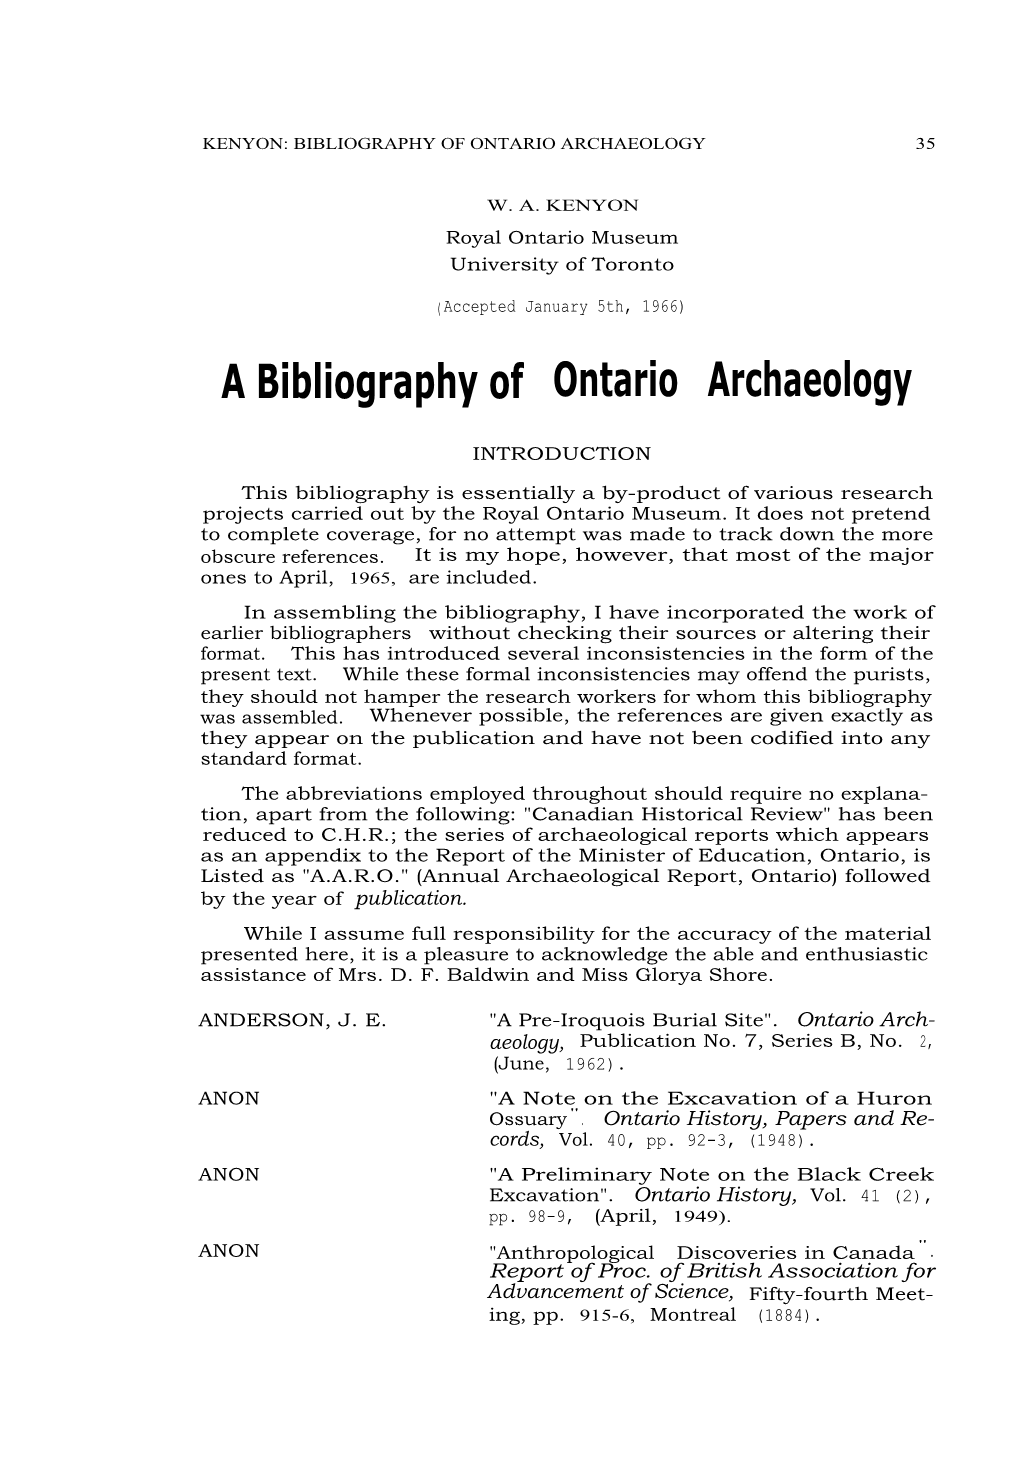 A Bibliography of Ontario Archaeology